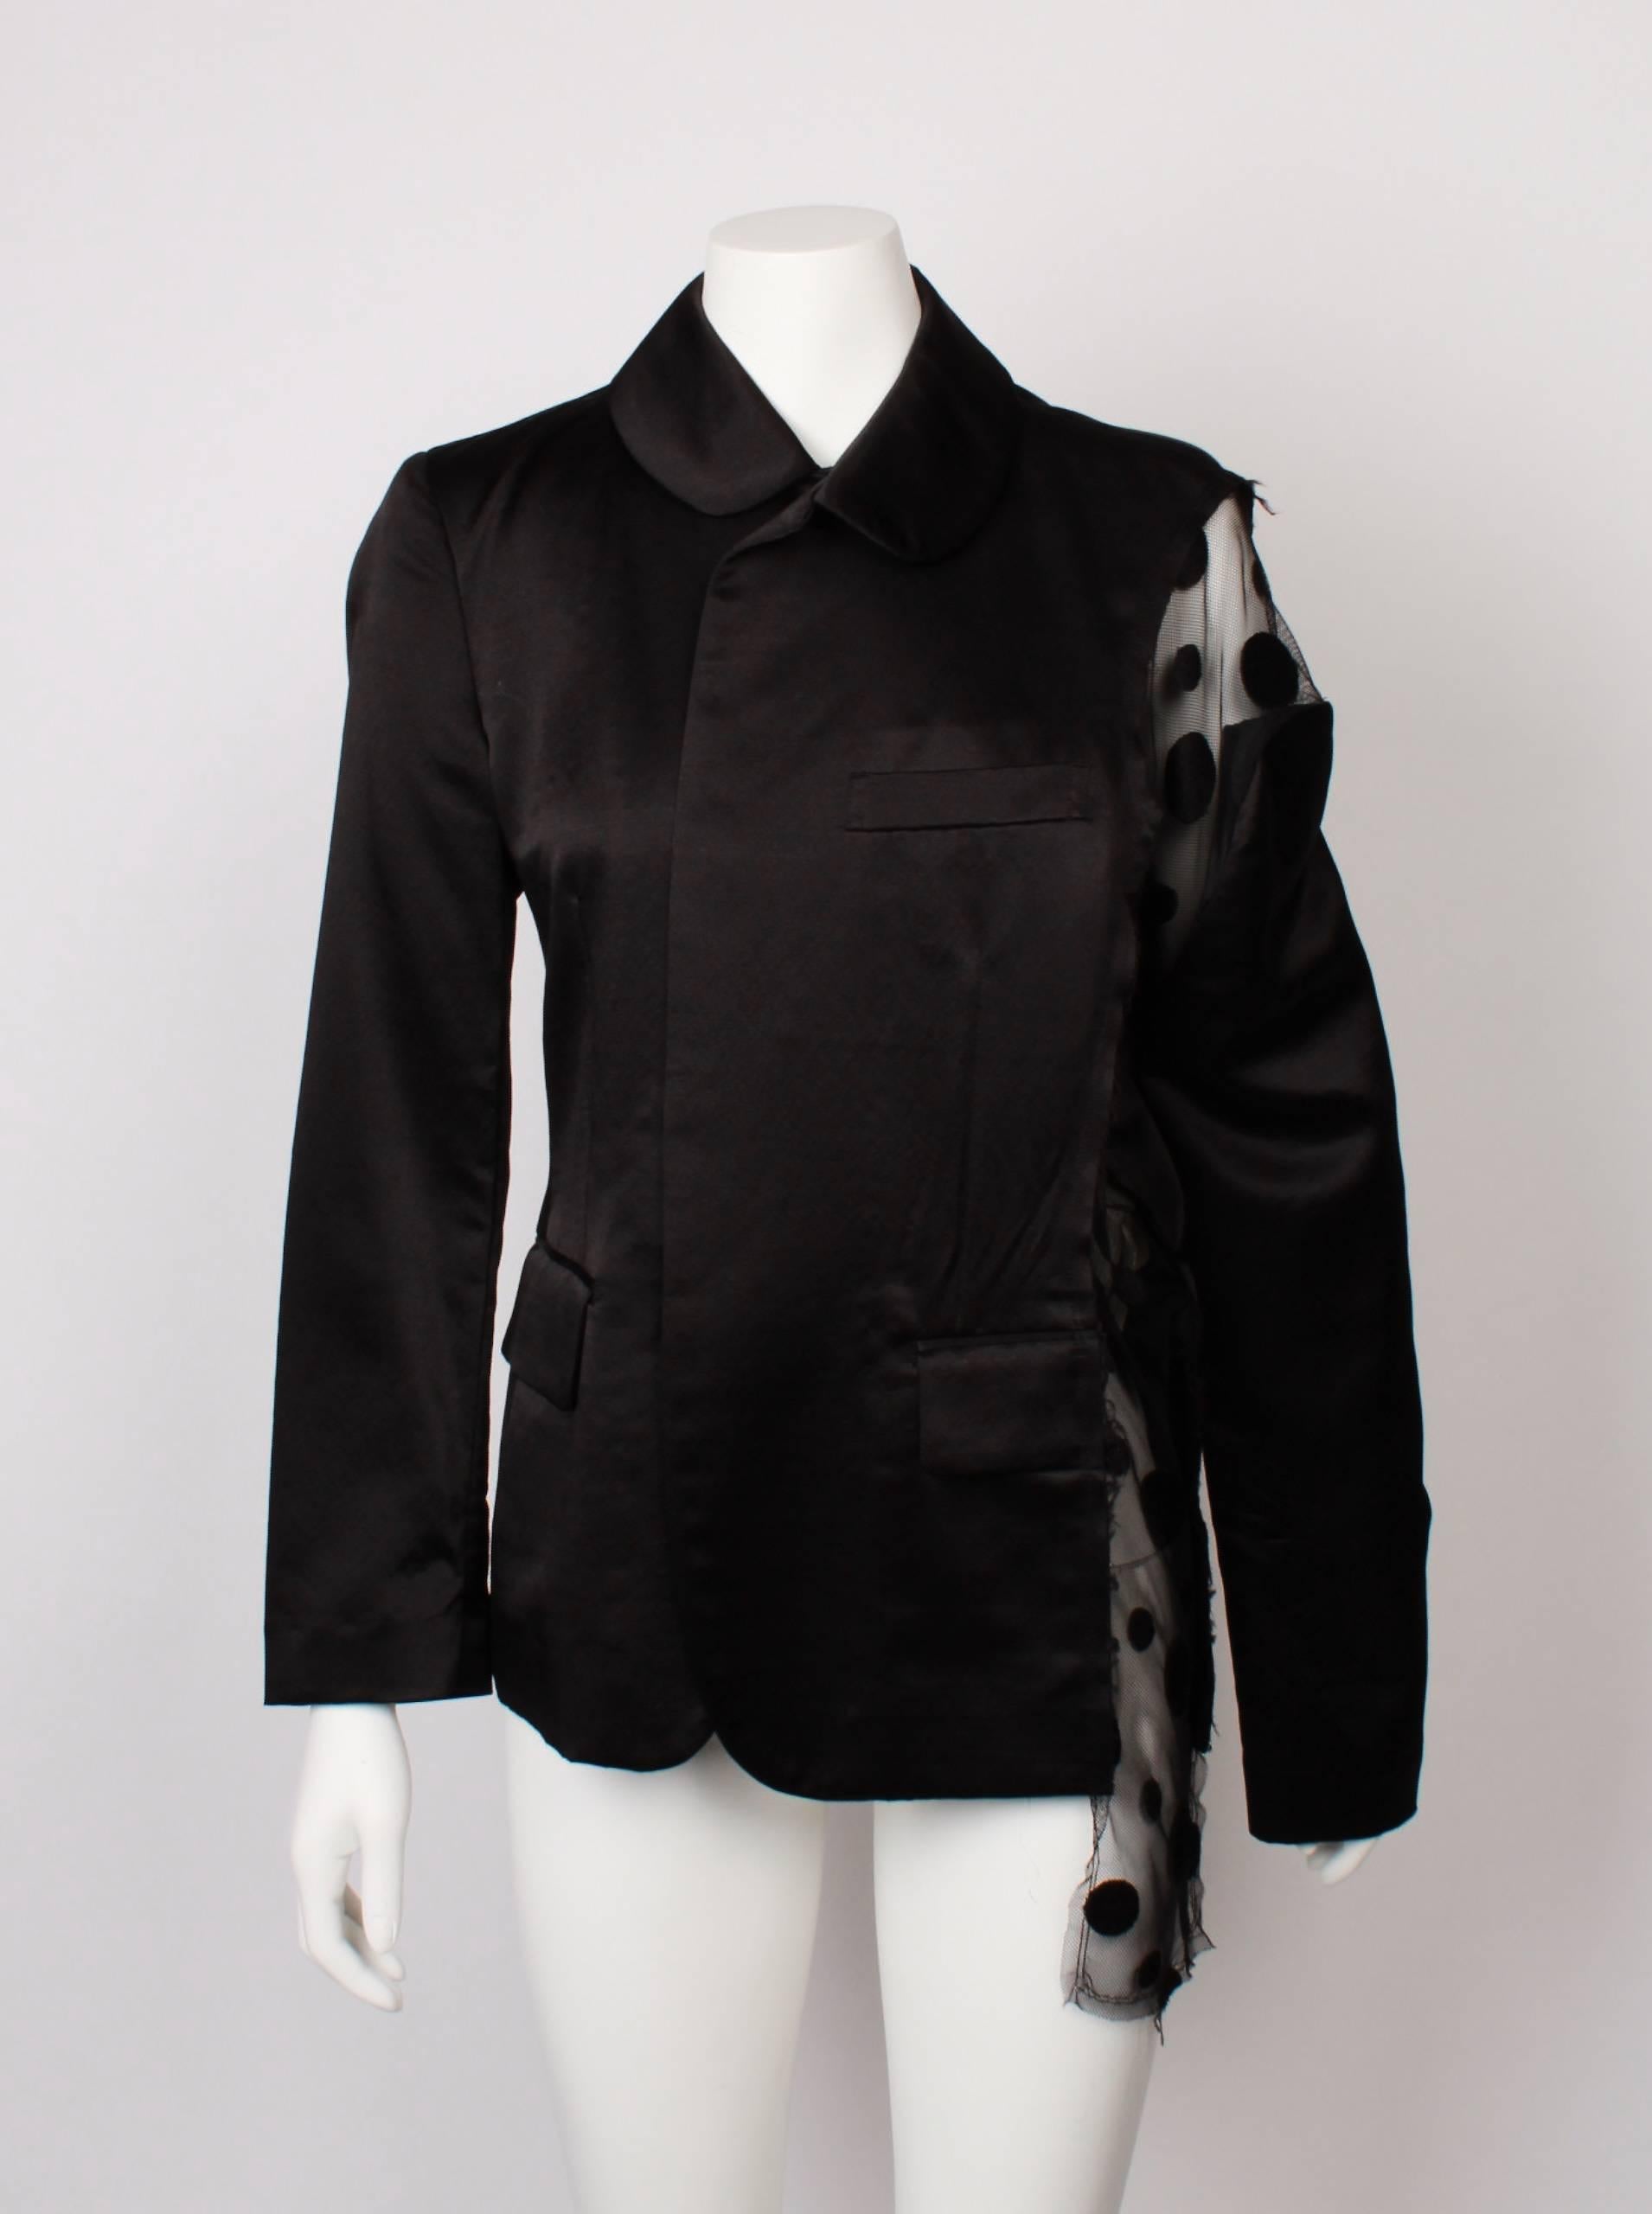 Comme Des Garcons satin evening jacket with sheer irregular spotted veil side panel. Spots are a type of velvet flock. 
Jacket features vertical flat bow belt loops and is single breasted with one functional flap pocket and breast pocket. Can be